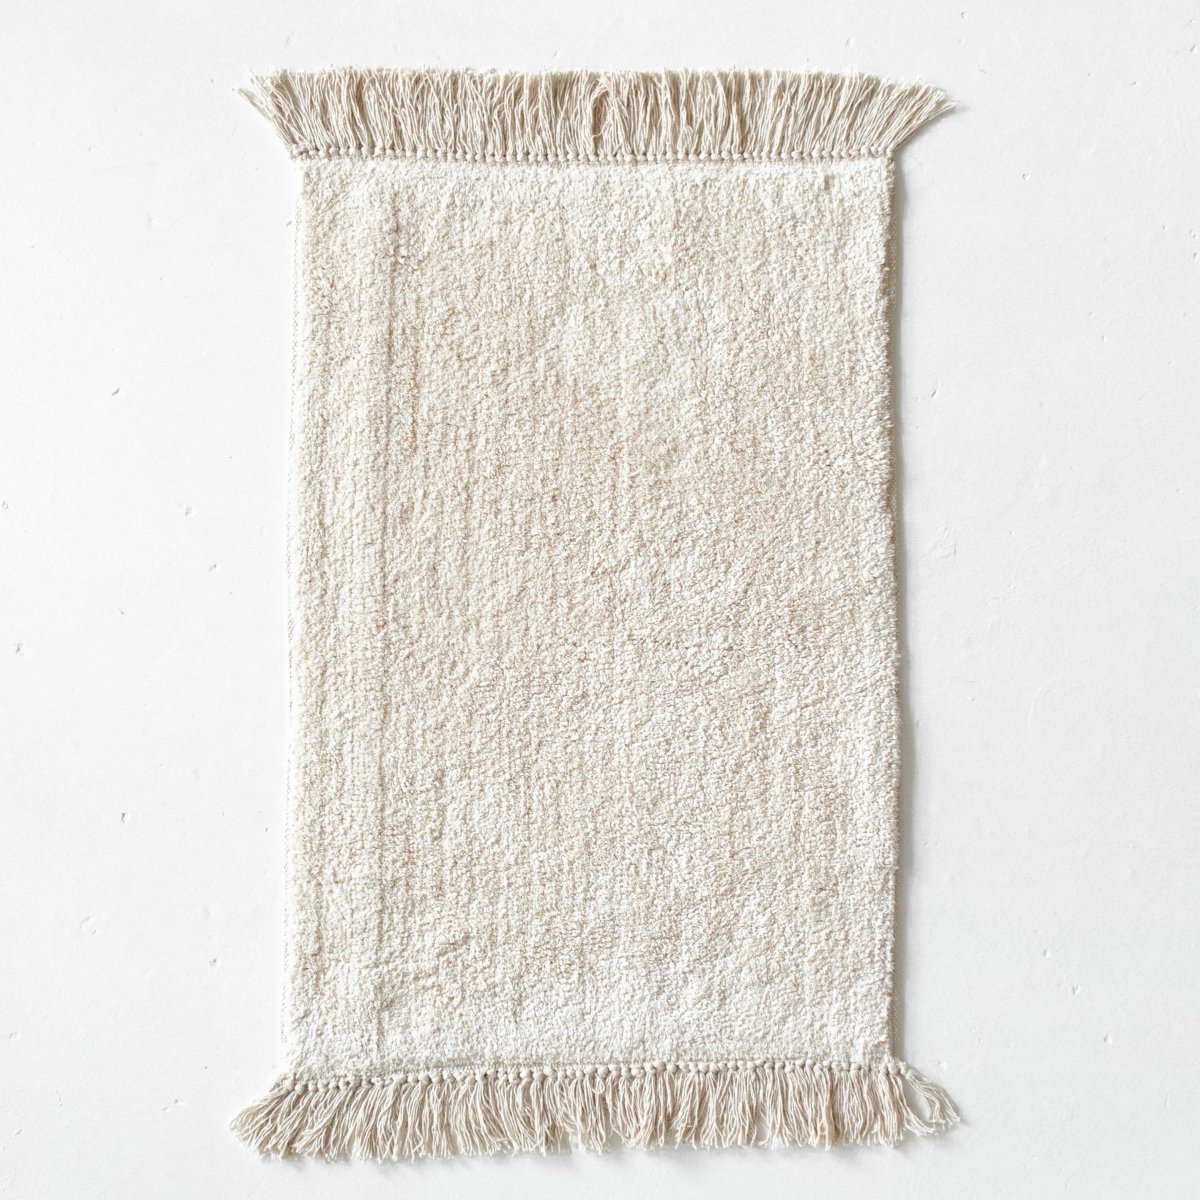 Load image into Gallery viewer, Rugs Dream Natural Rug Bath Mat - With Tassels